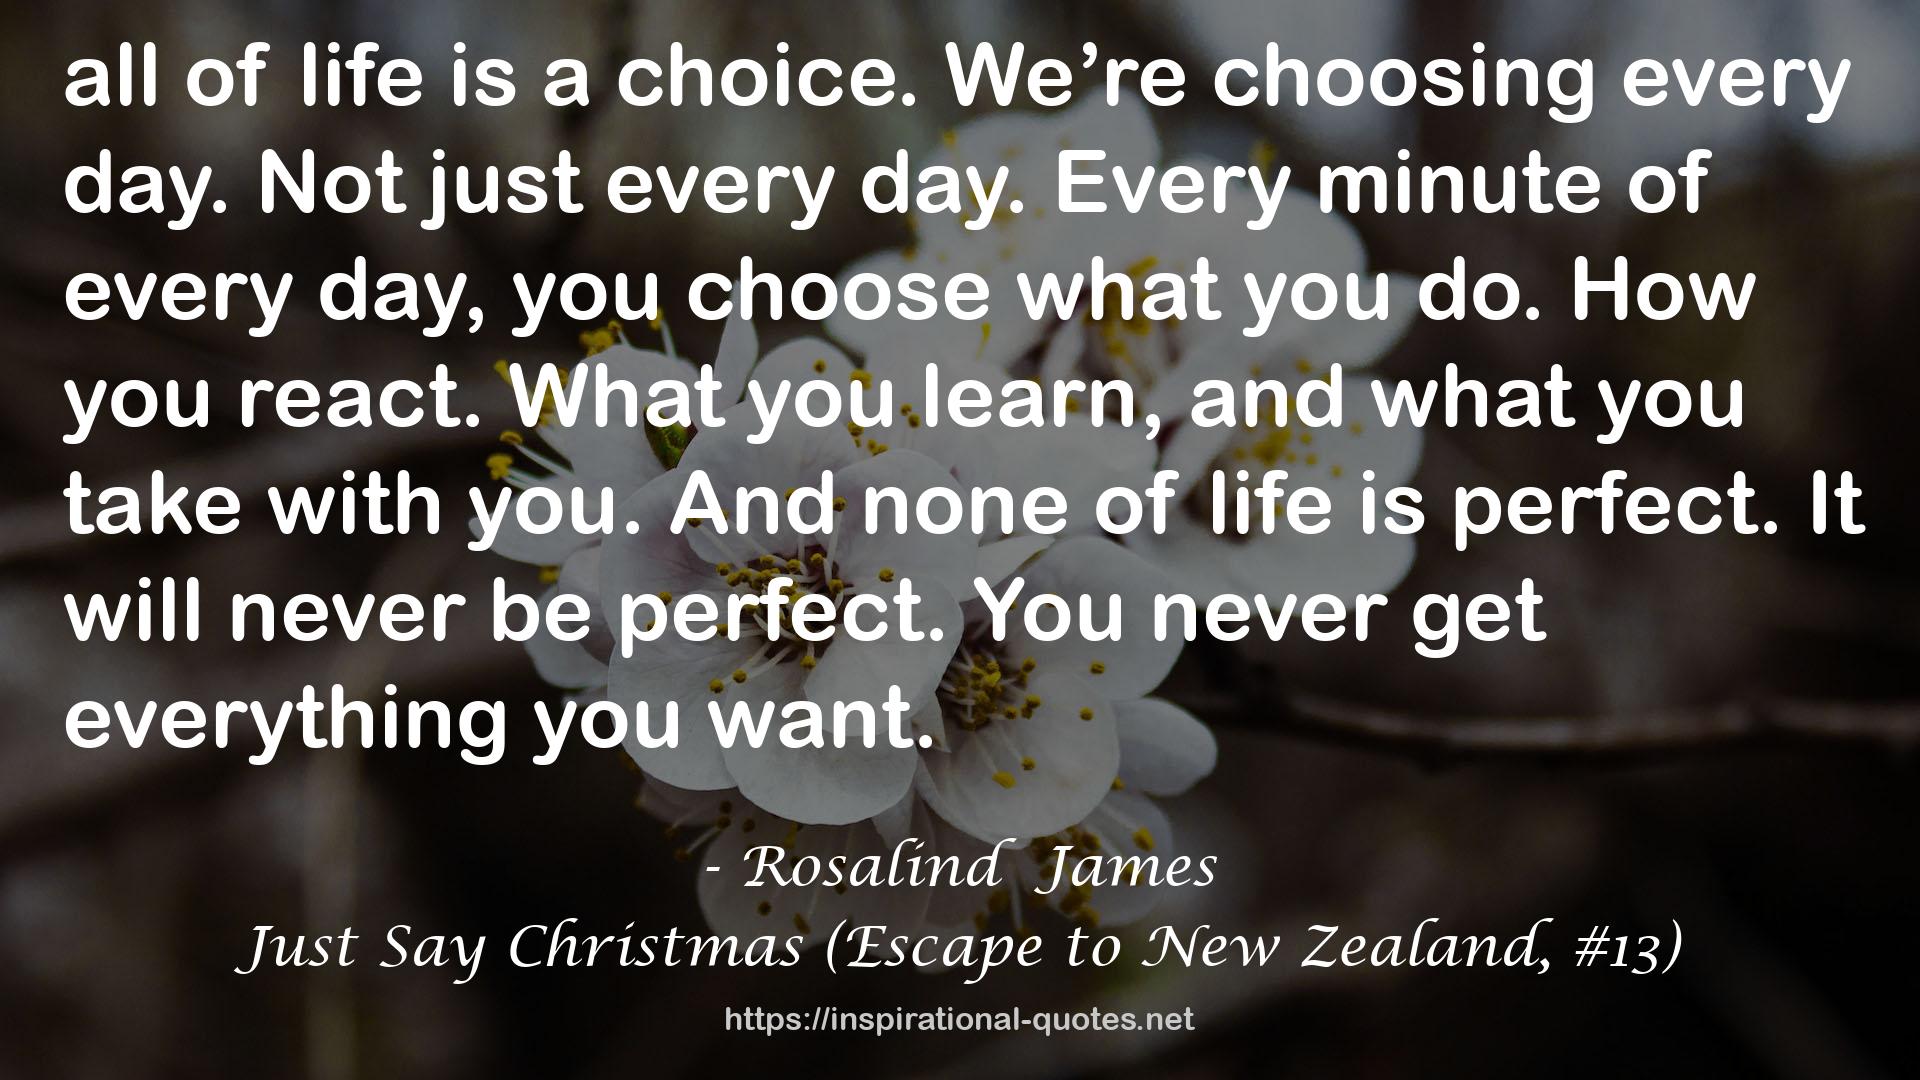 Just Say Christmas (Escape to New Zealand, #13) QUOTES